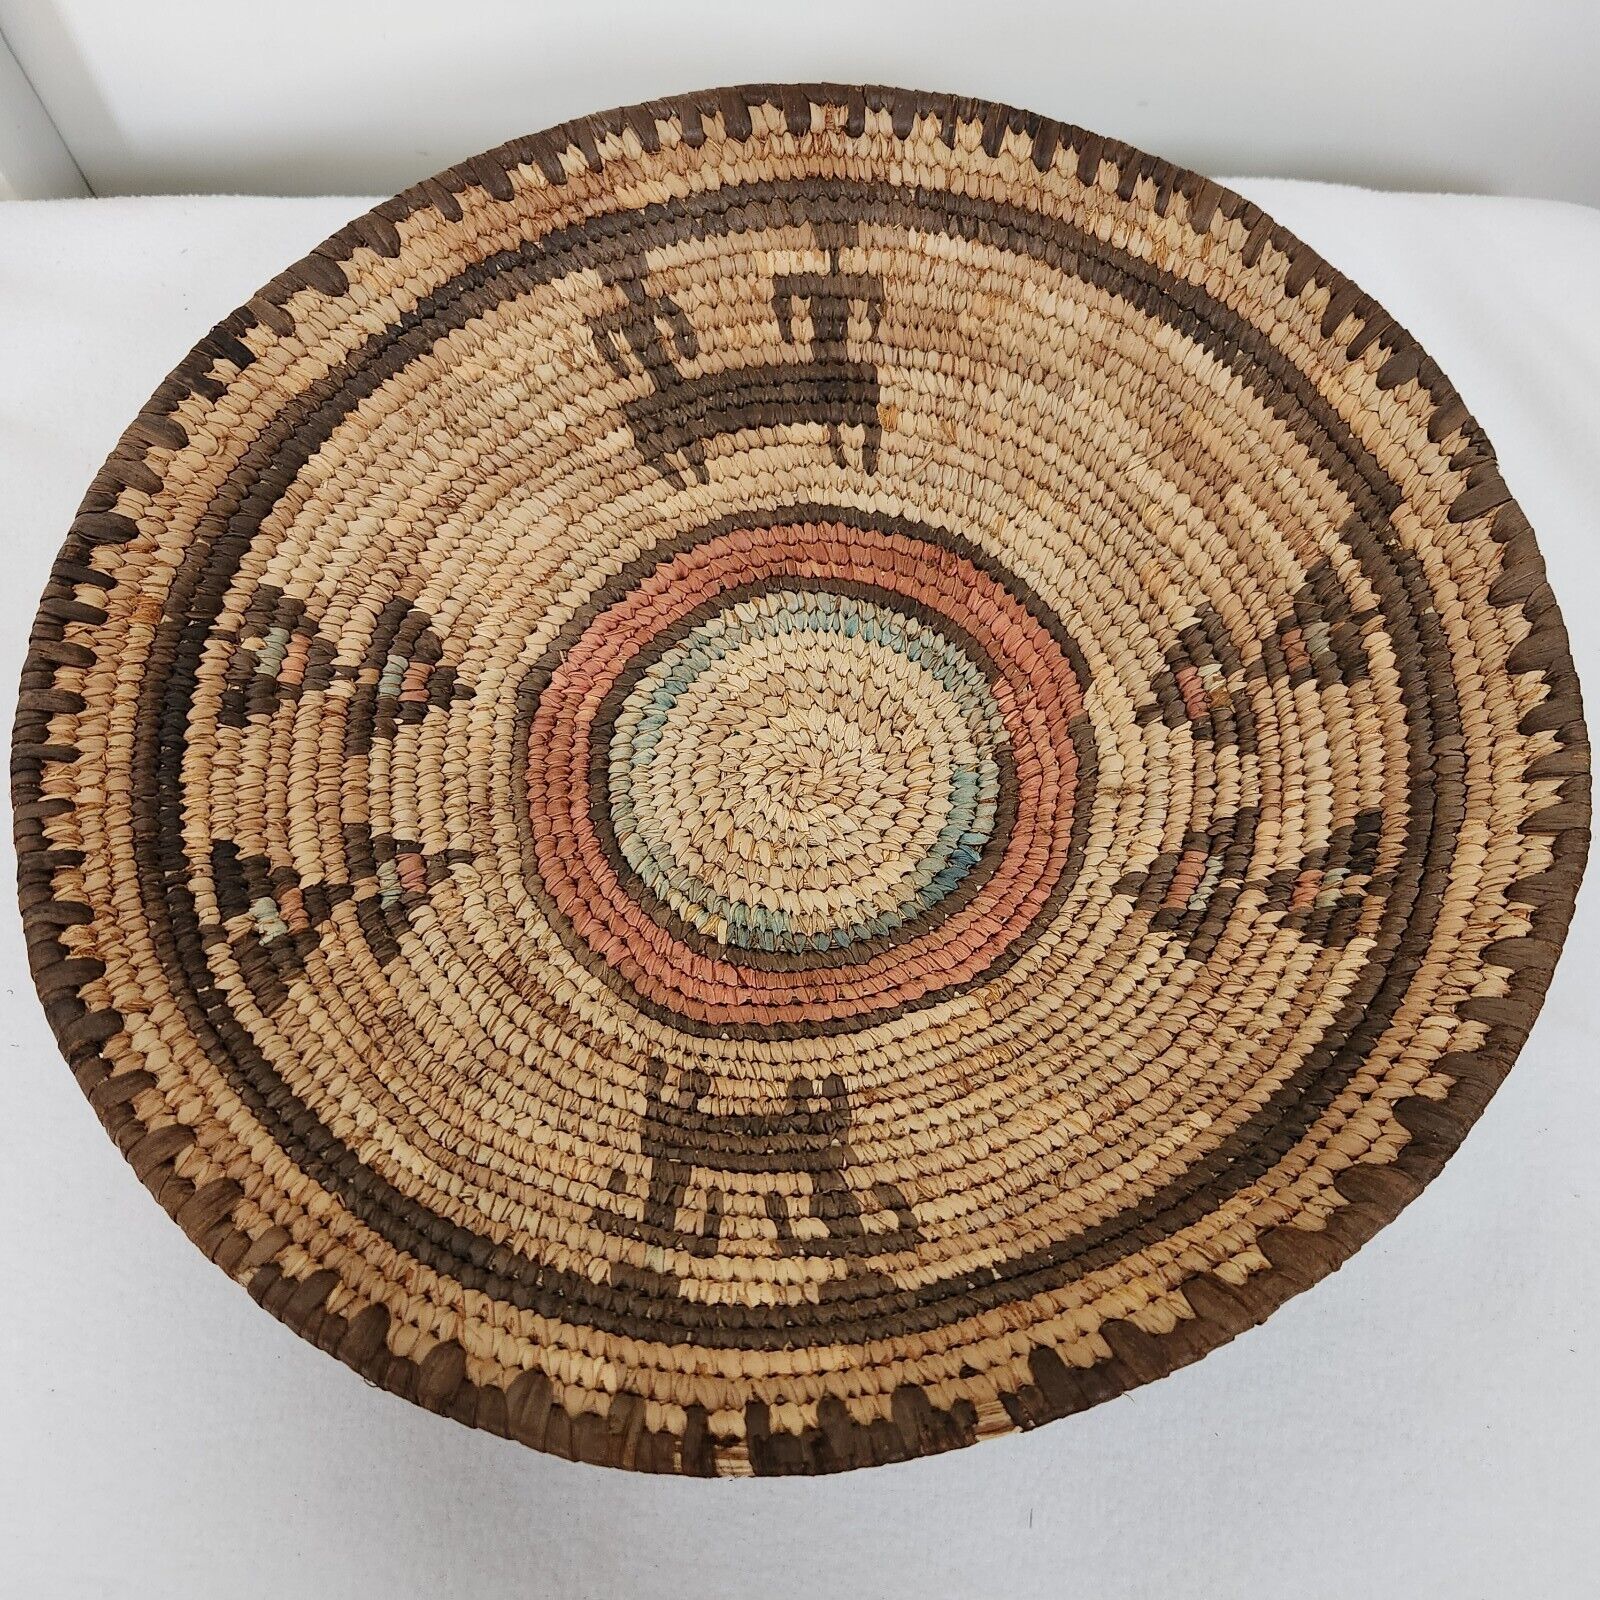 Vintage African Hausa Tribe Woven Circular Coil Weave Geometric Basket Tray